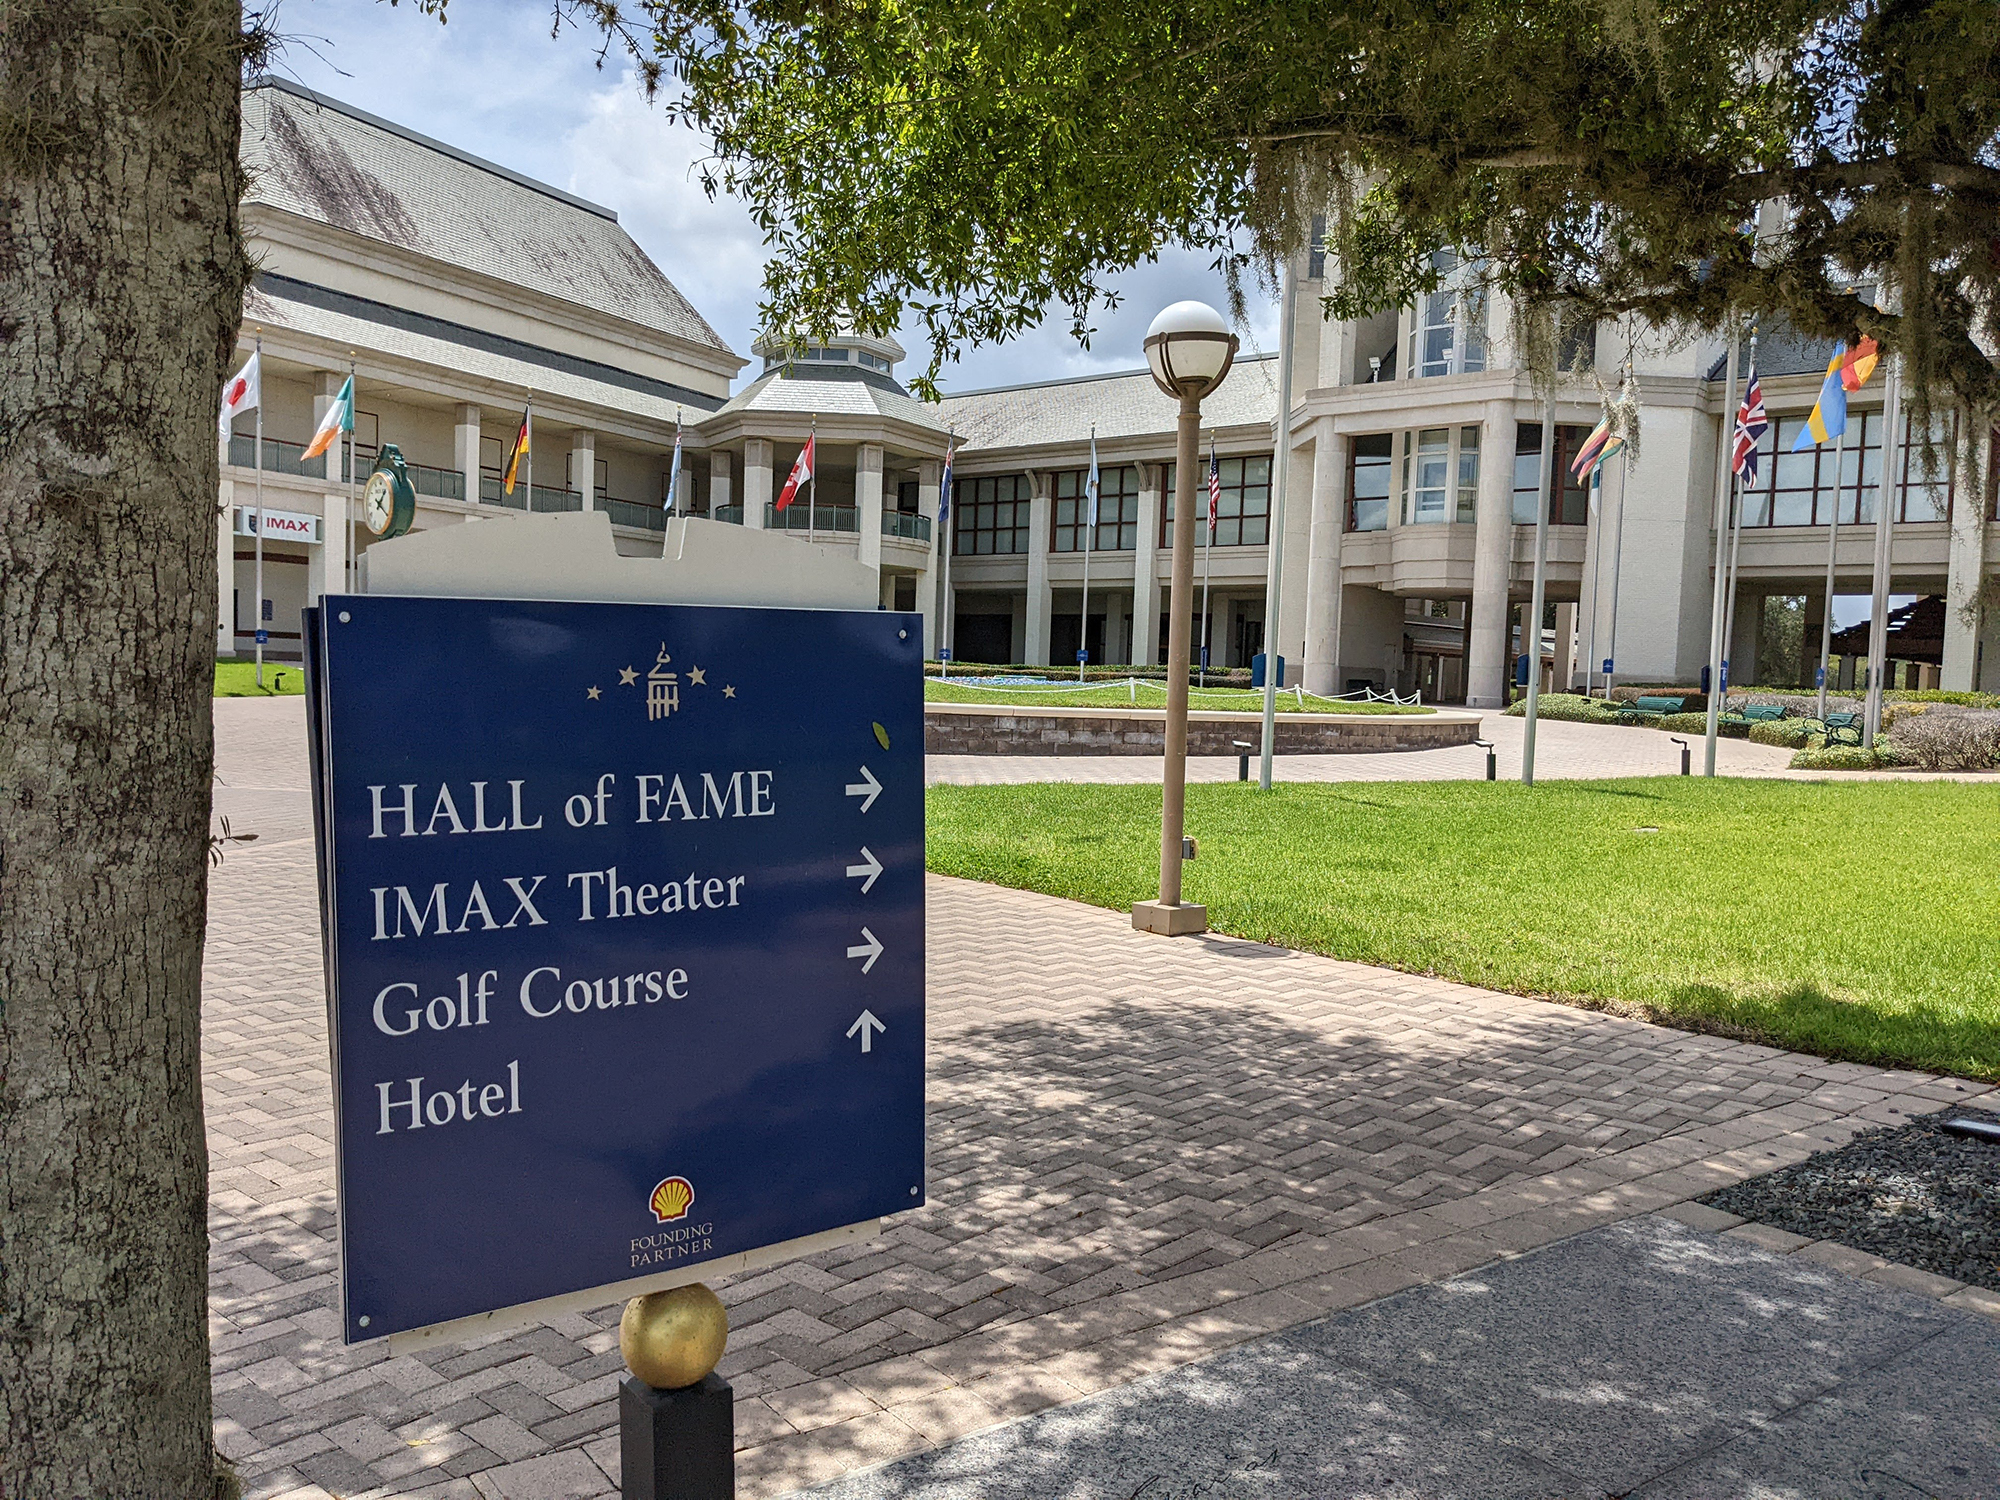 The Hall of Fame building also houses the IMAX Theater, which shows first-run films and documentaries. Nearby are the Slammer & Squire golf course and the World Golf Village Renaissance St. Augustine Resort hotel.